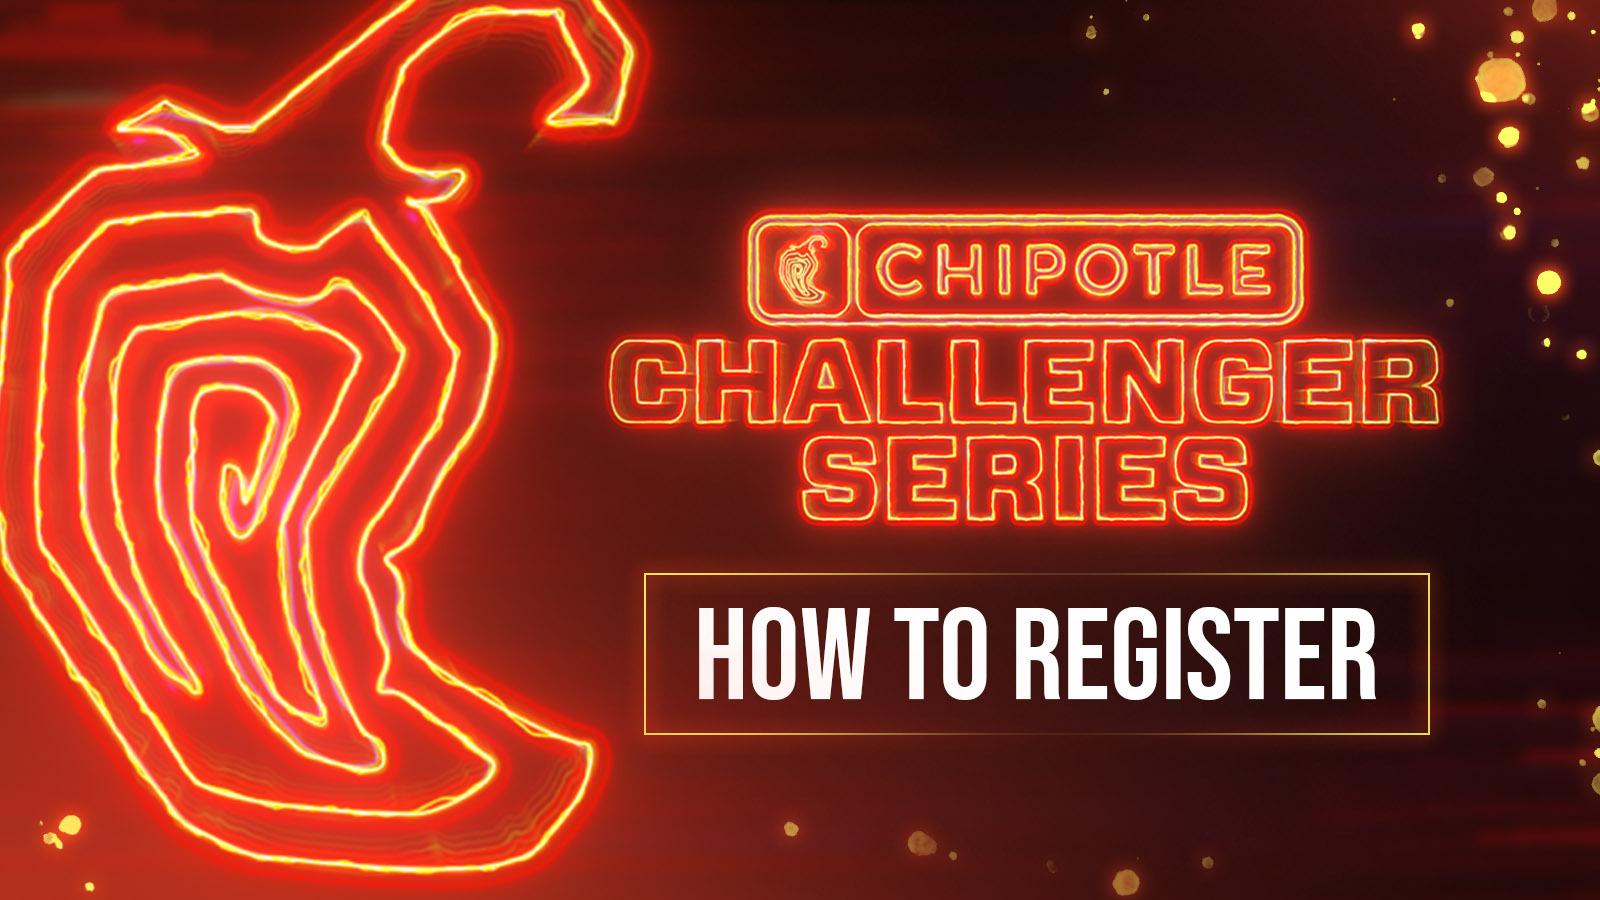 How to register for Chipotle Challenger Series